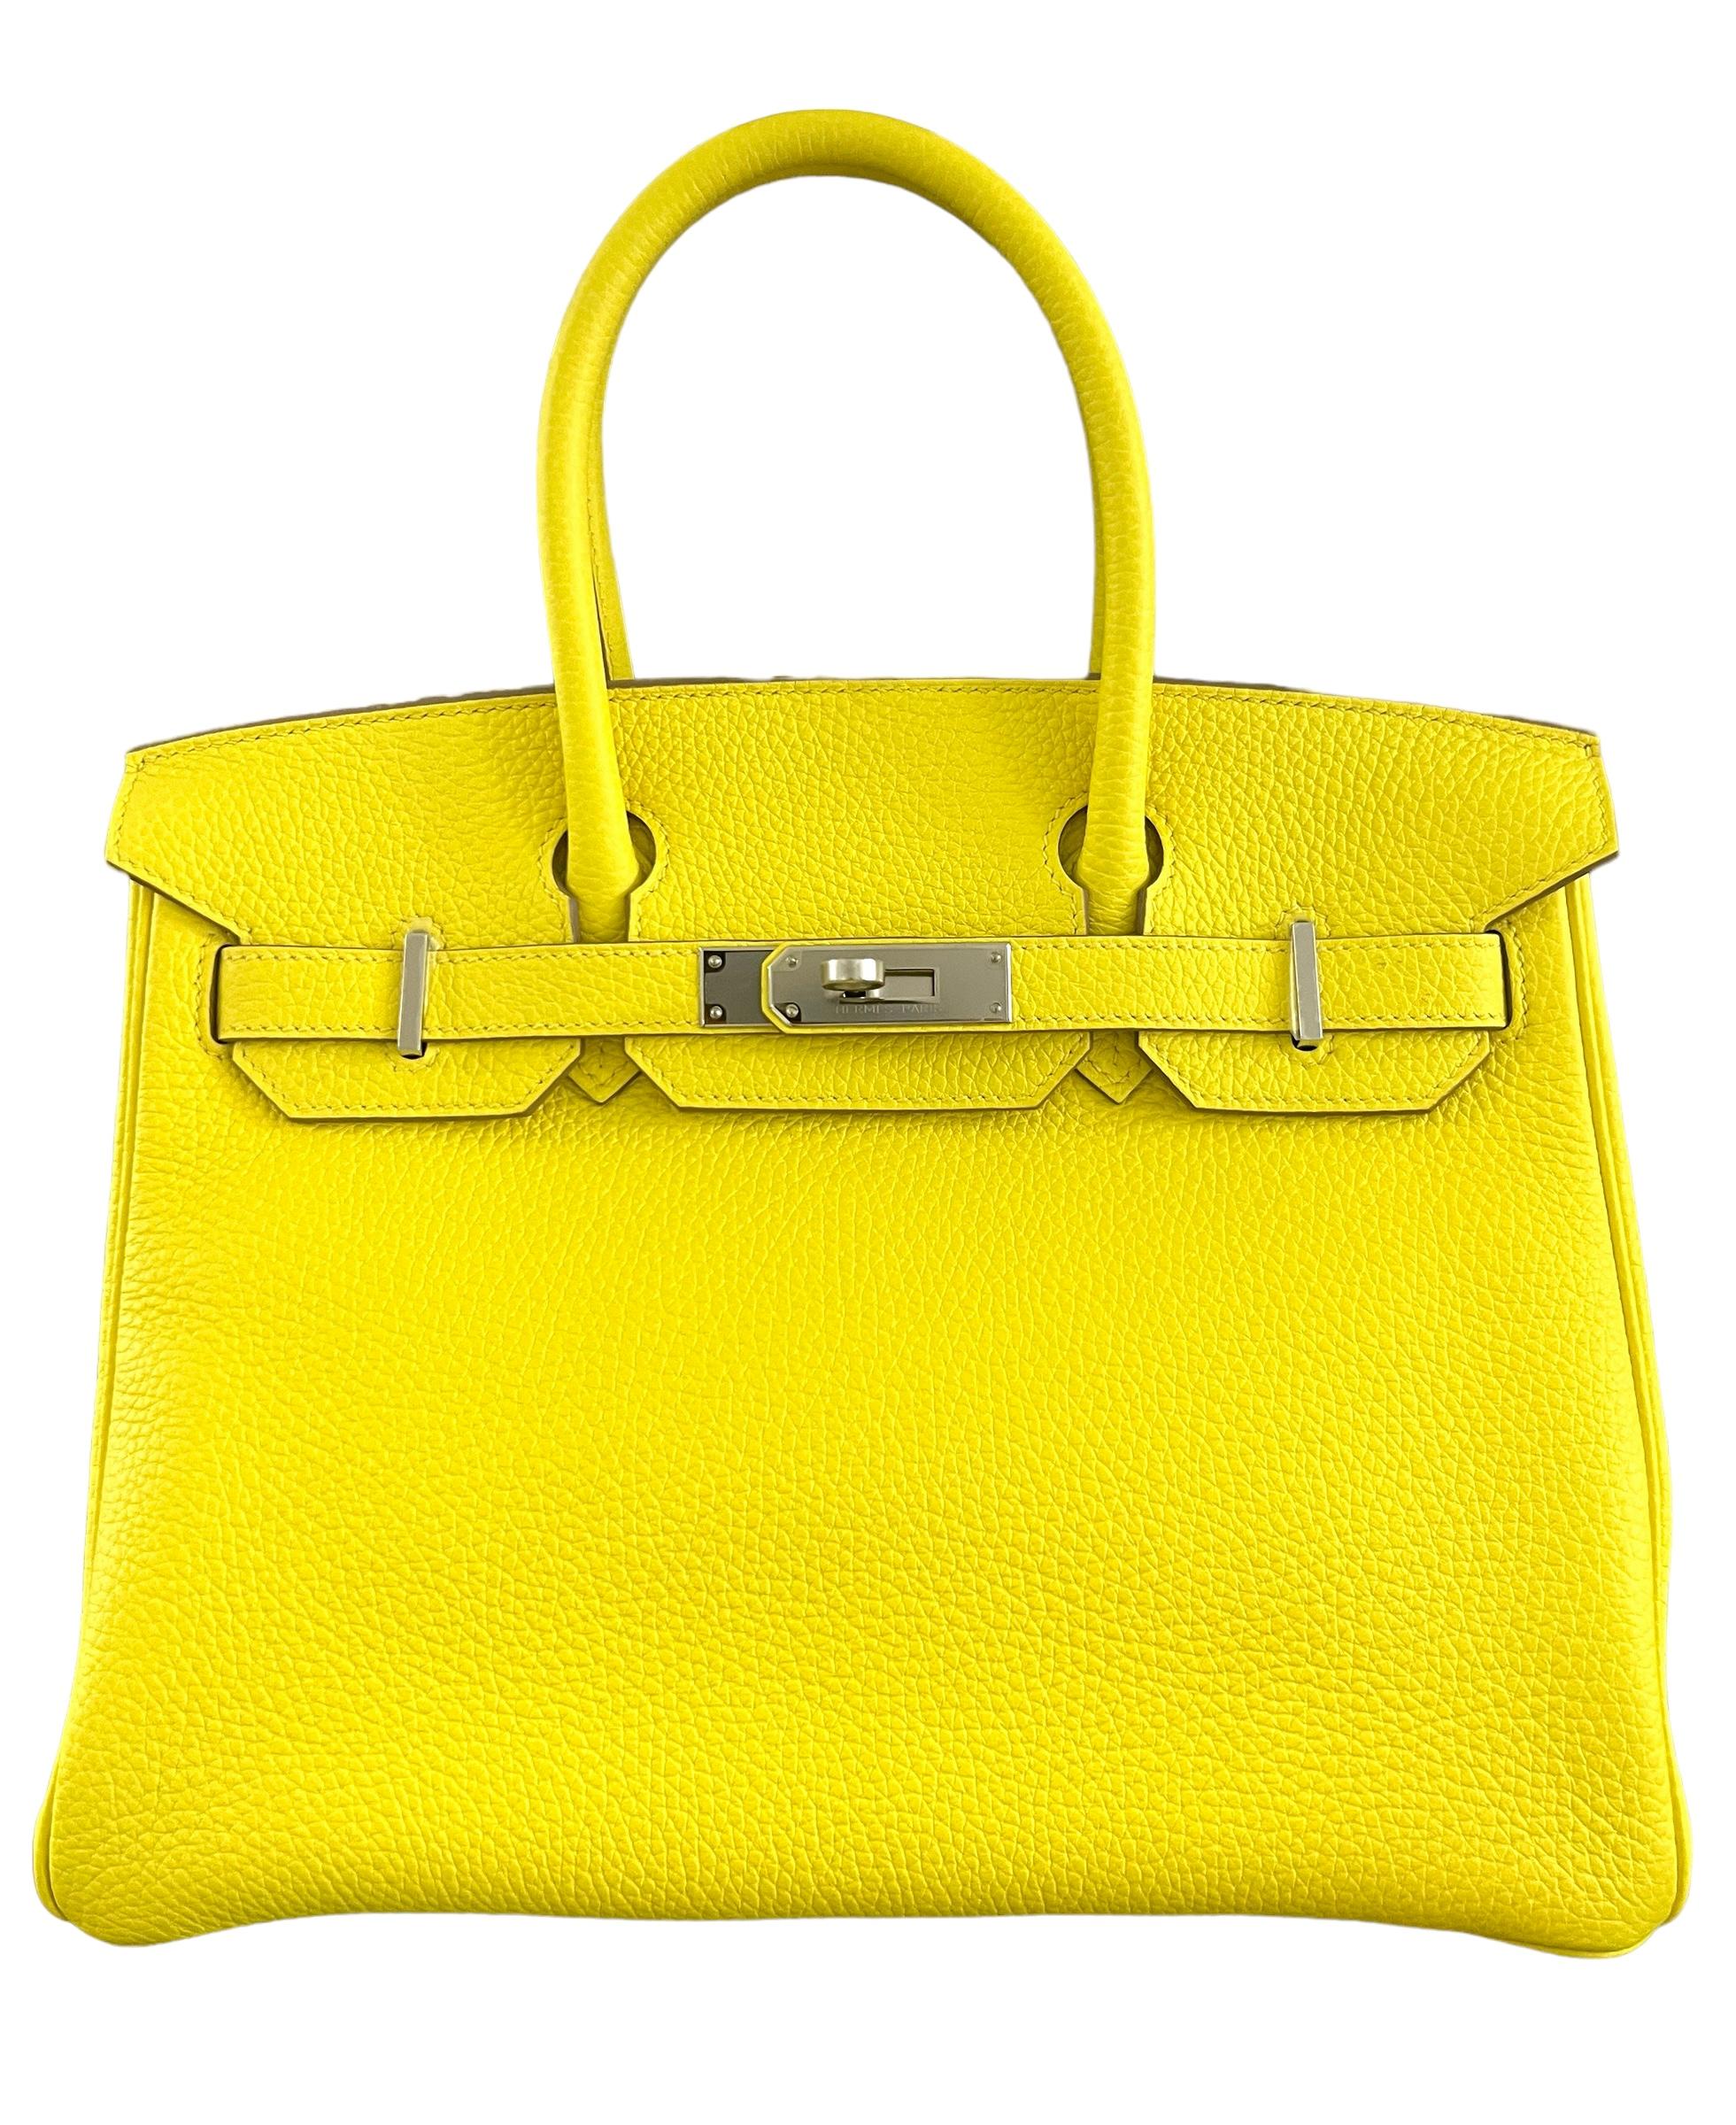 New 2022 Stunning Hermes Birkin 30 Lime Yellow Leather Complimented by Palladium Hardware. U Stamp 2022.

Shop with Confidence from Lux Addicts. We are a very well known and highly respected Hermes seller worldwide. Authenticity Guaranteed!





